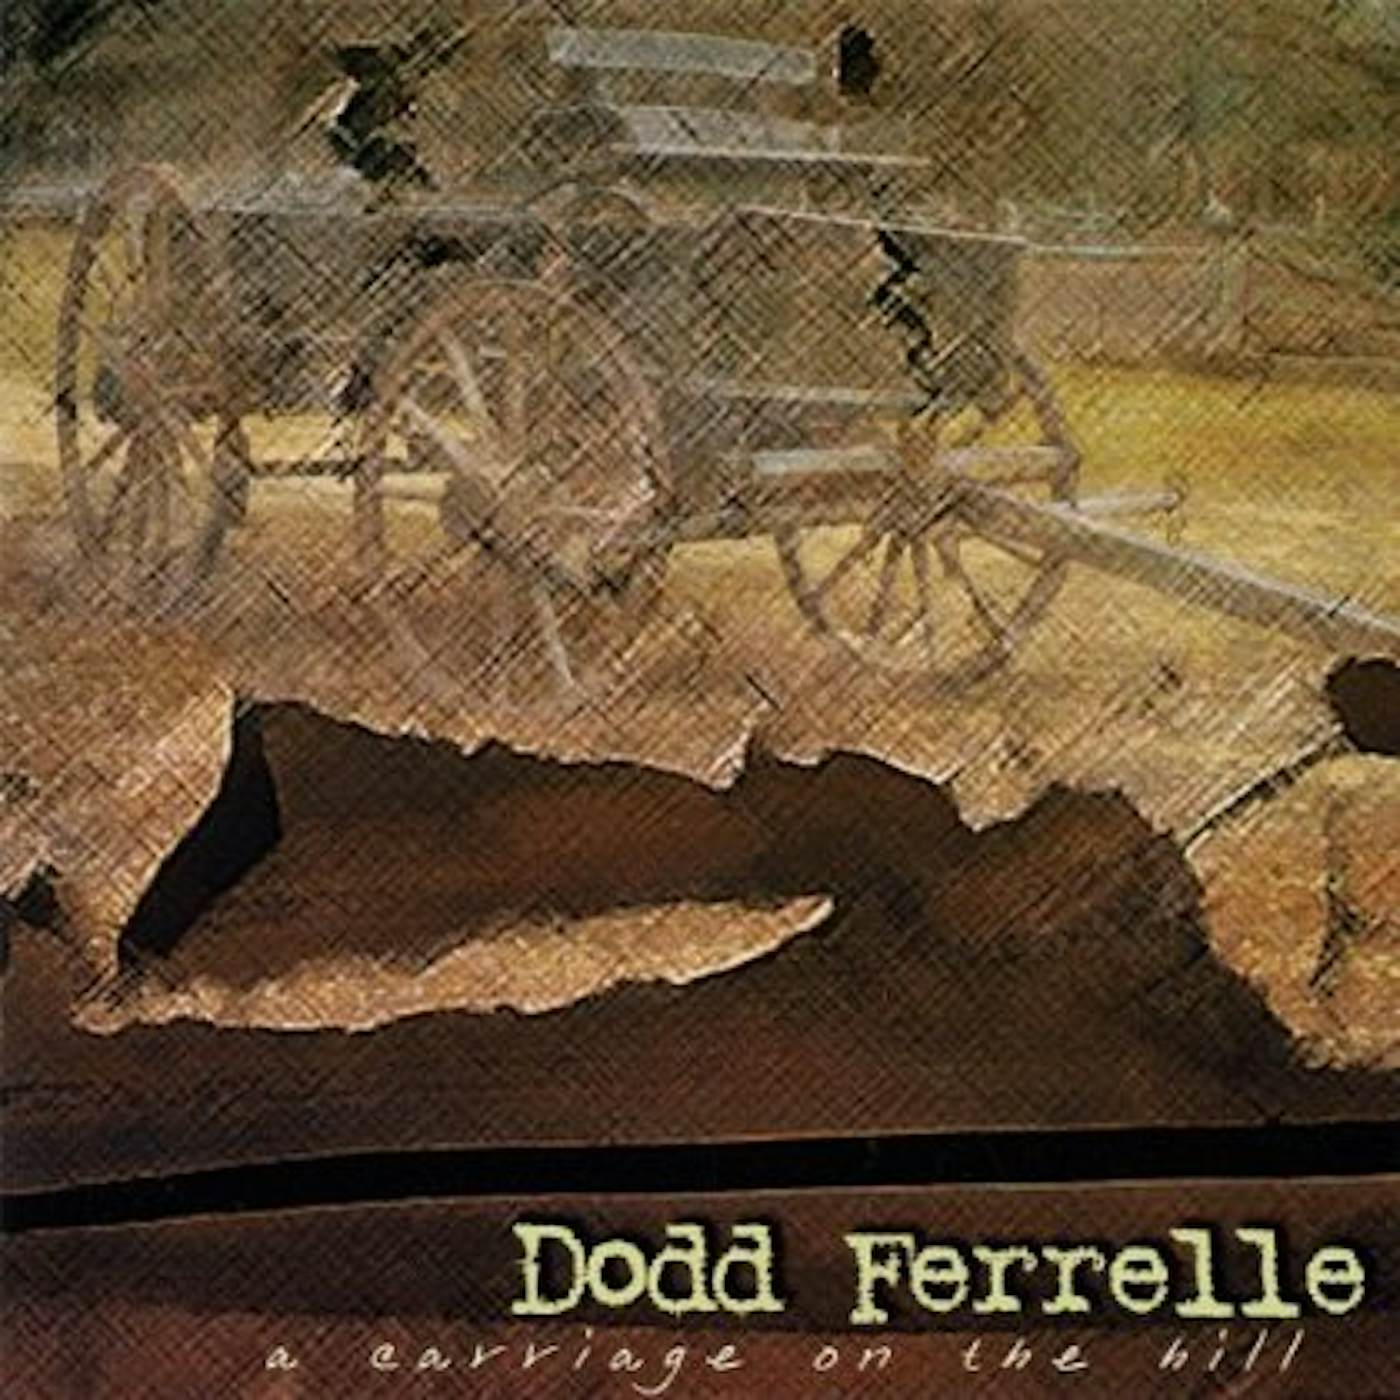 Dodd Ferrelle CARRIAGE ON THE HILL CD